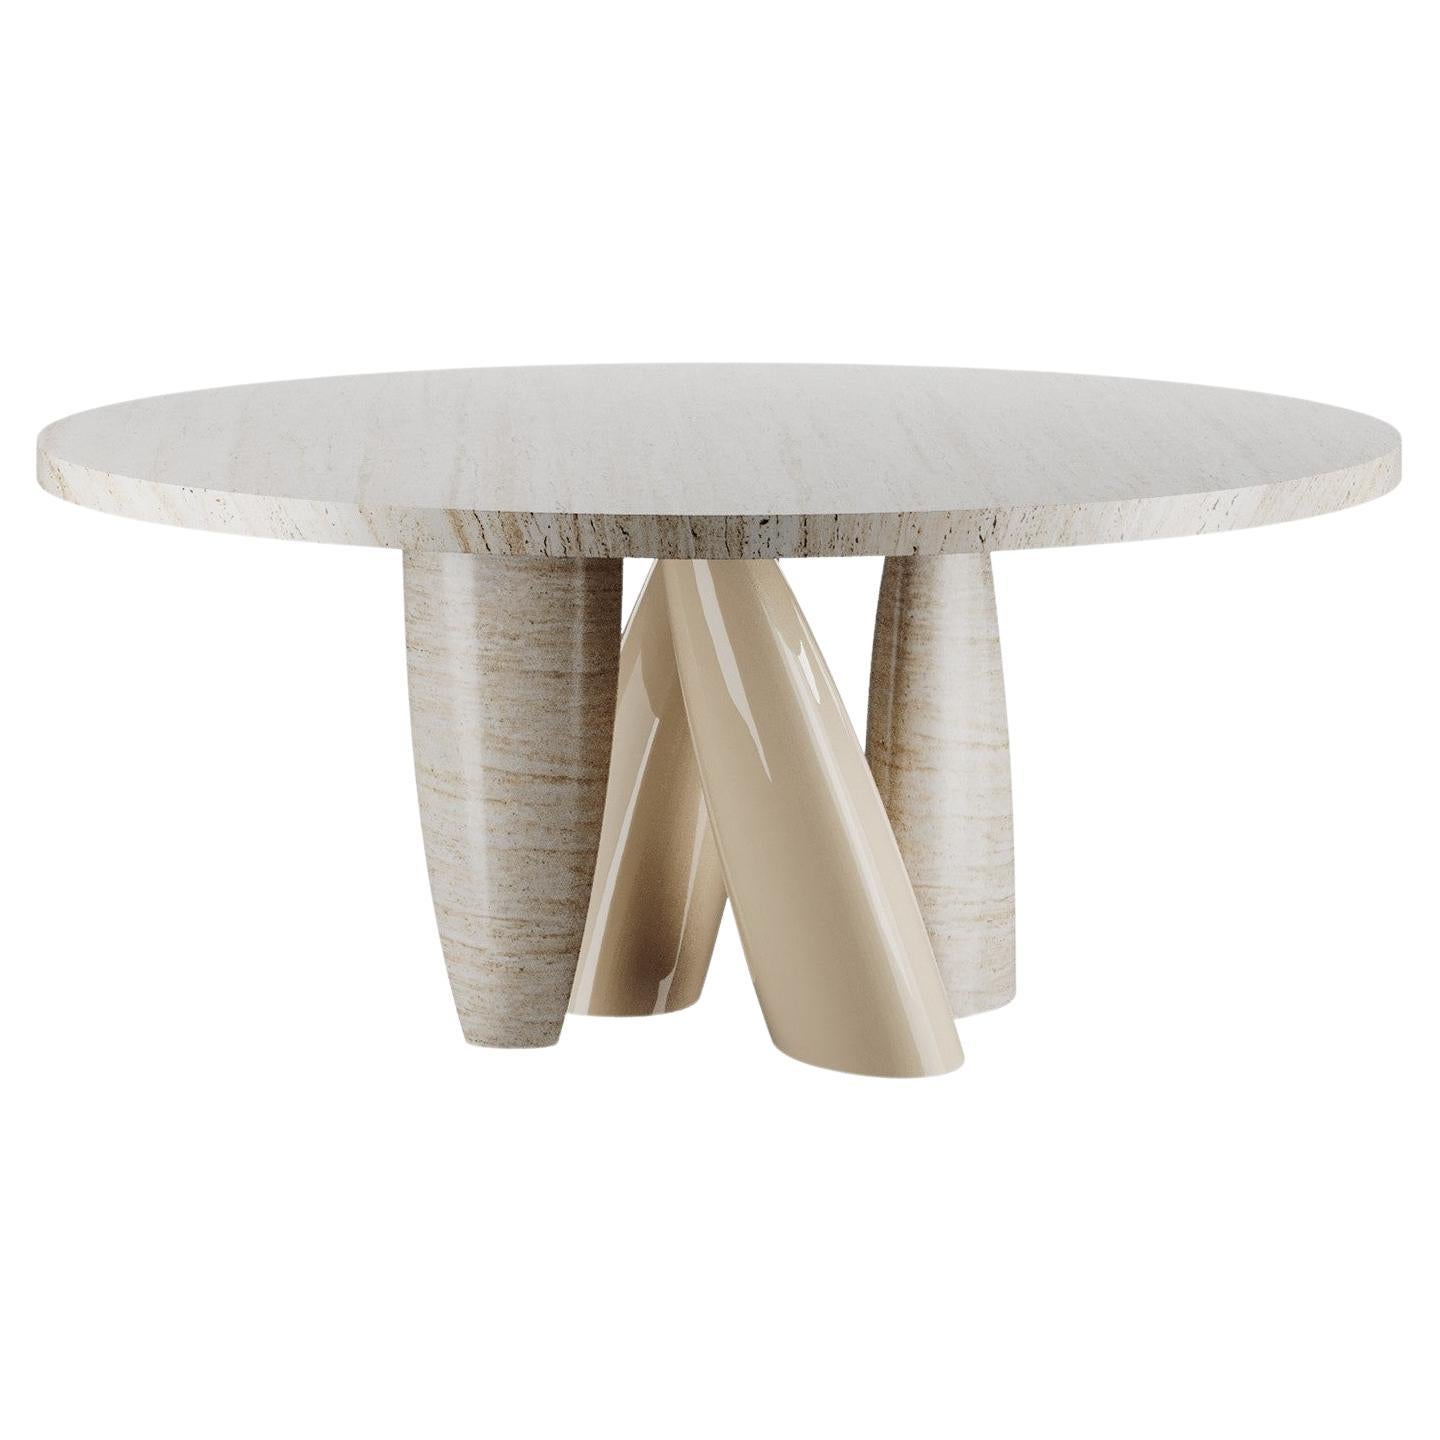 Minimal Organic Modern White Round Dining Table in Travertine Marble Lacquered